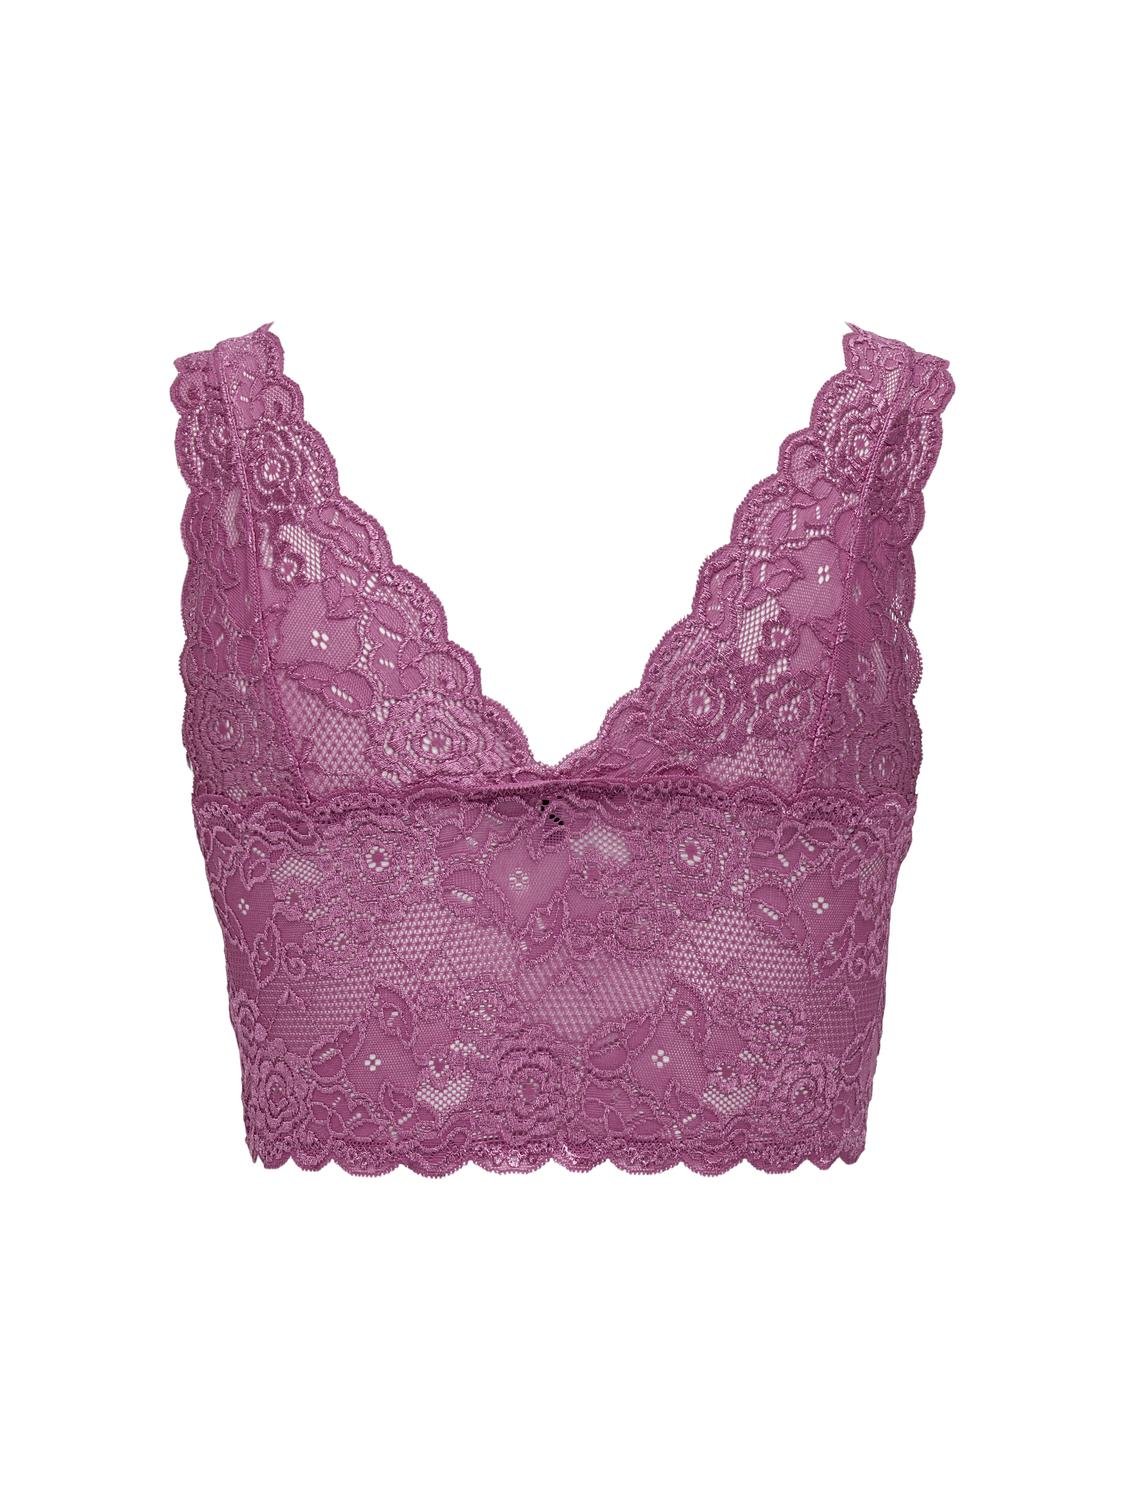 ONLY Lace Bra -Red Violet - 15107599